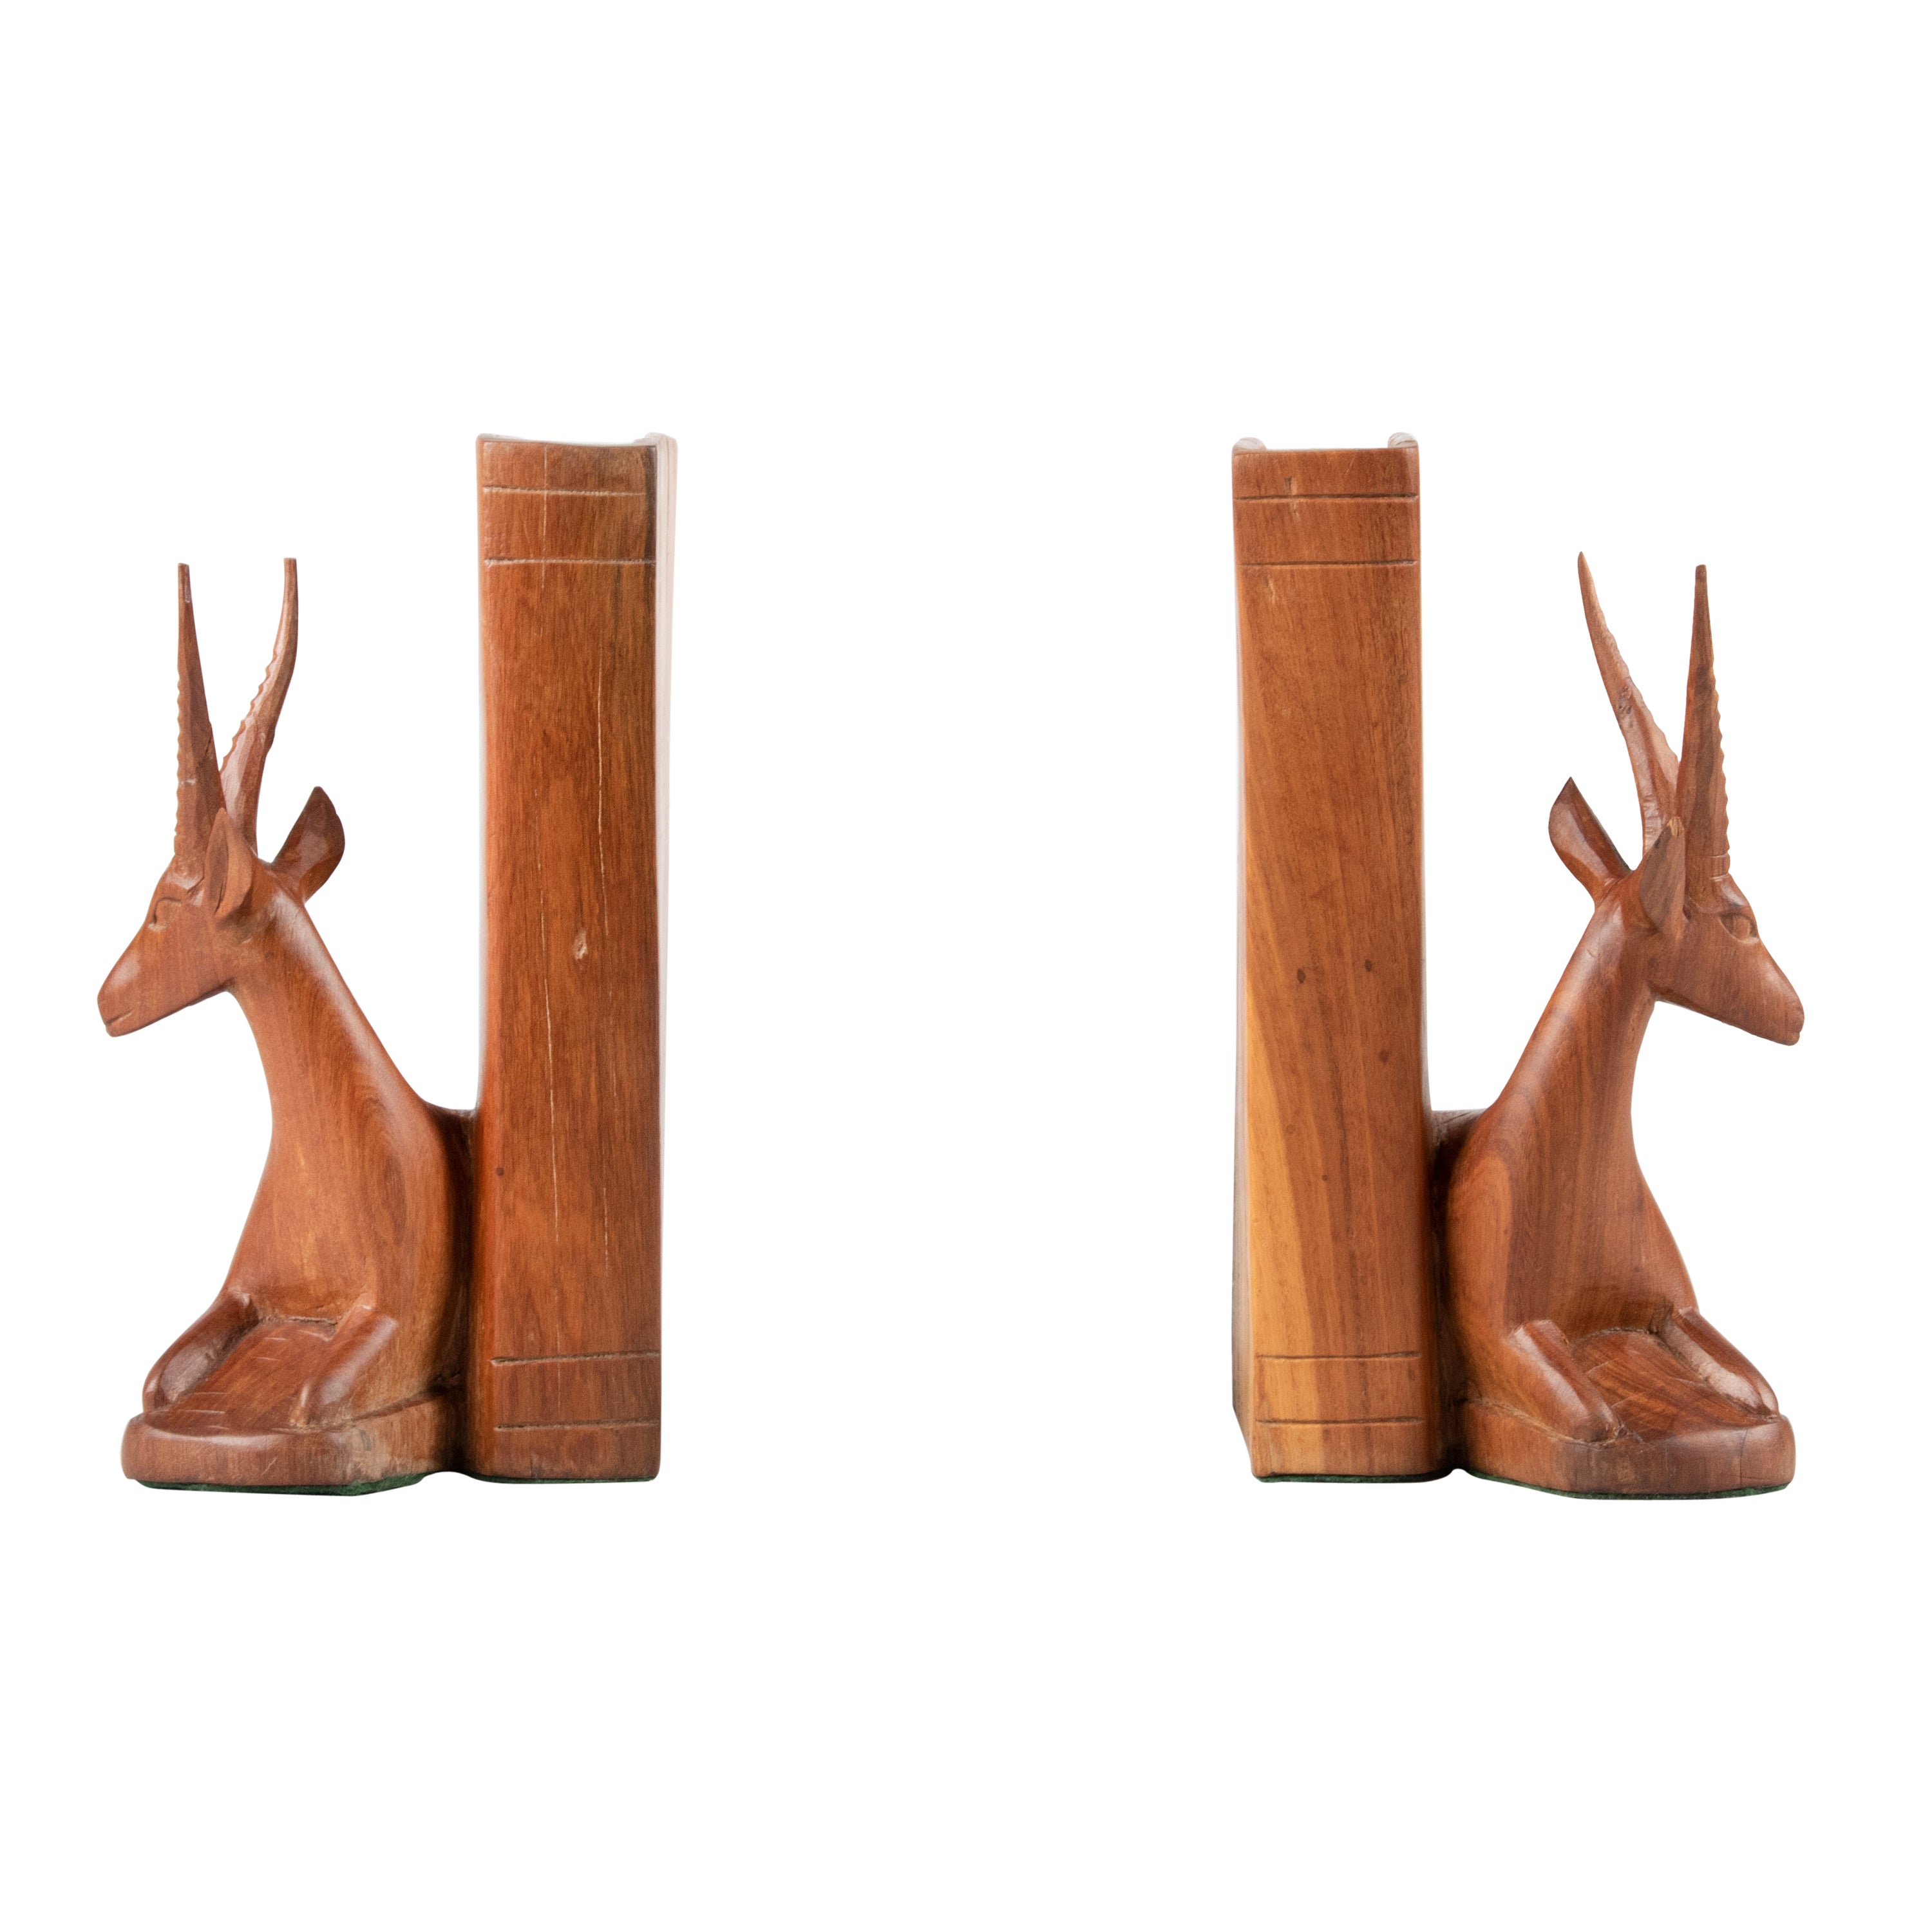 Pair of Teak Wood Carved Mid Century Bookends with Deers